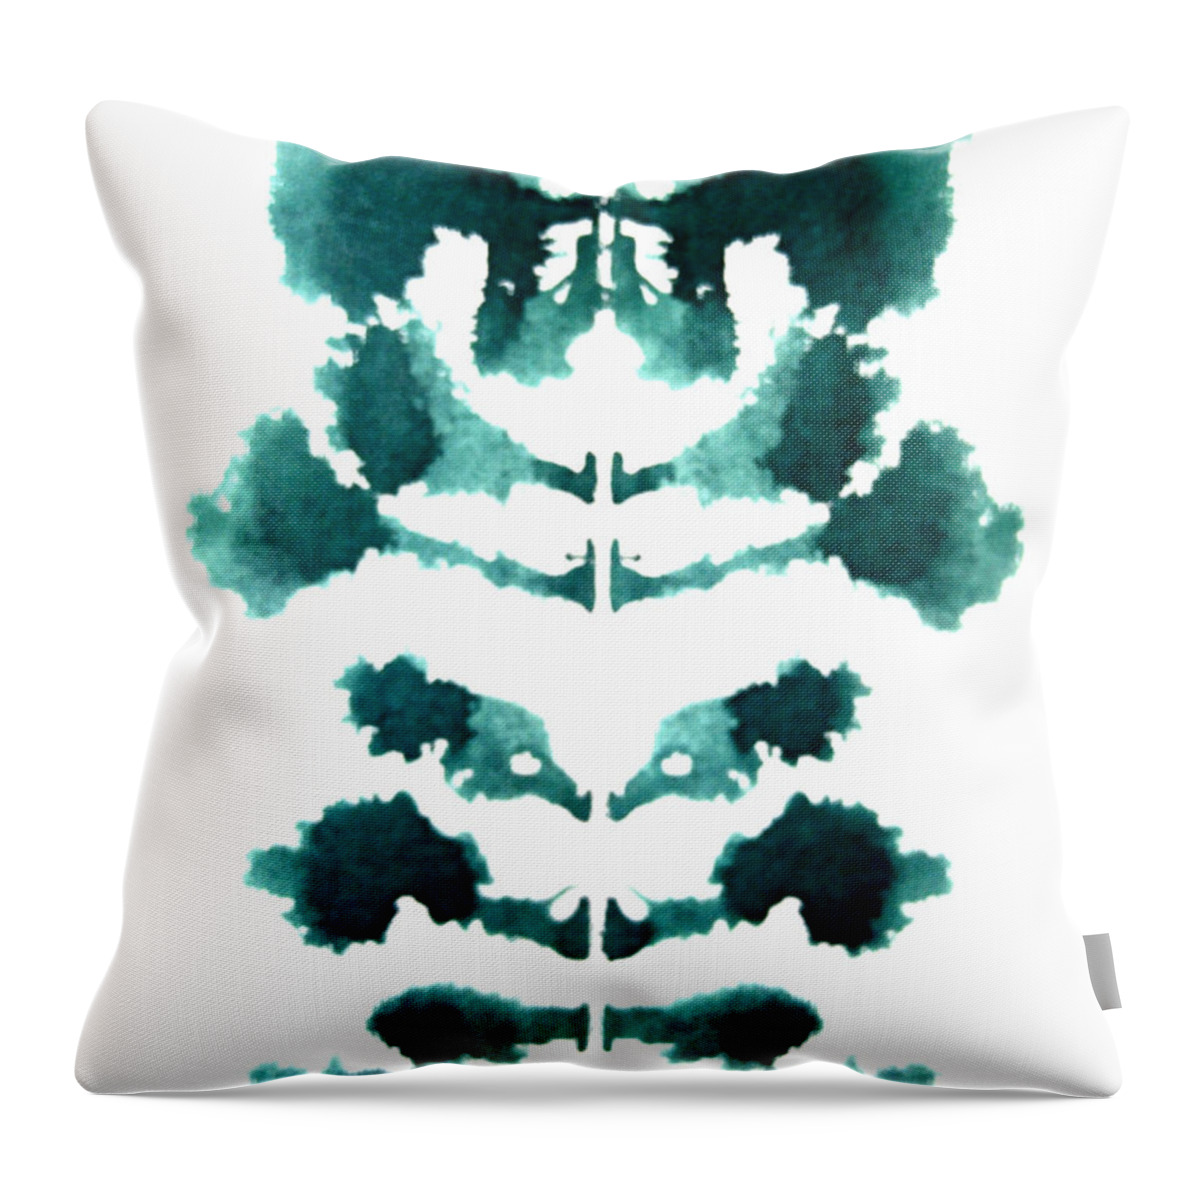 Ink Blot Throw Pillow featuring the painting Heart Chakra by Stephenie Zagorski